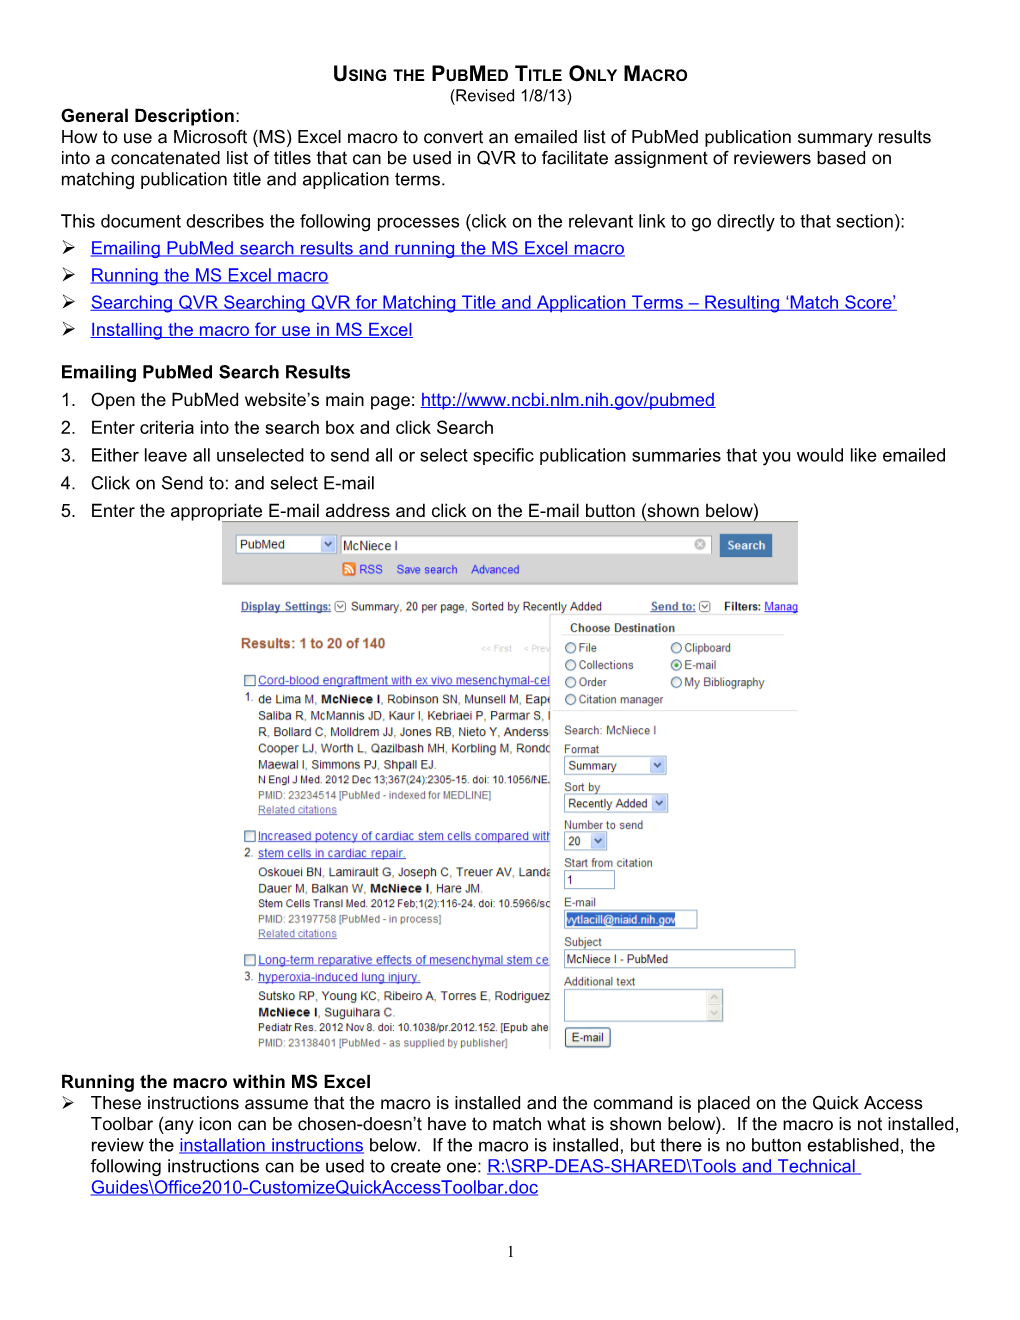 General Instructions to Search Pubmed for Potential Reviewer Cois Using a Macro